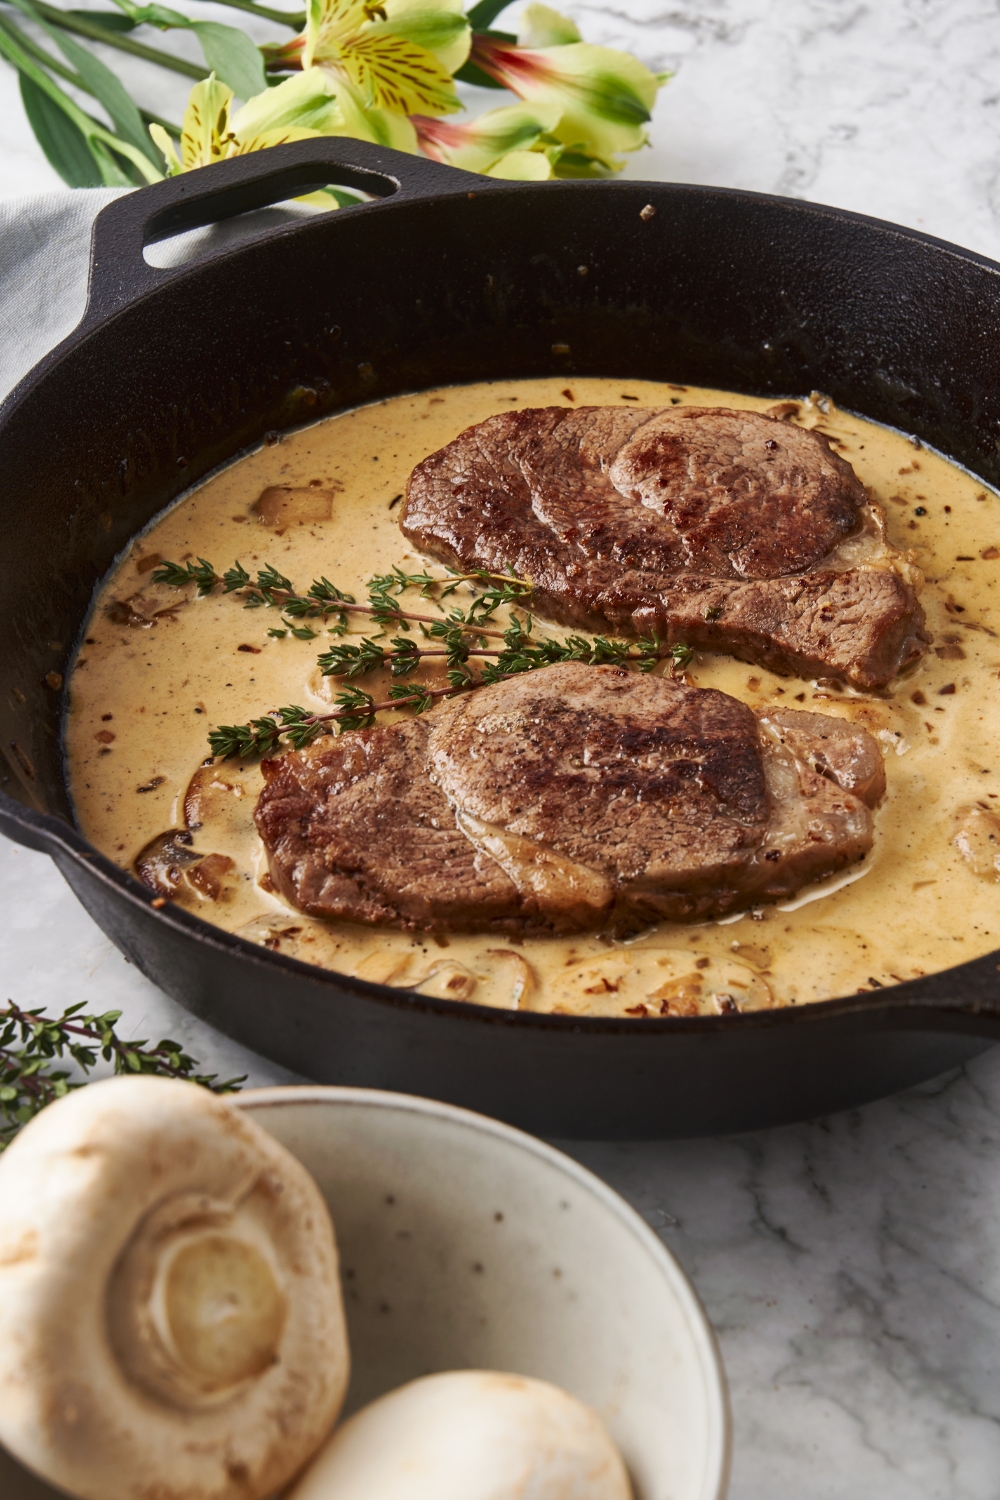 Two seared filet mignon steaks in a cast iron skillet surrounded by a brown mushroom sauce. There is a bowl of whole raw mushrooms next to the skillet.